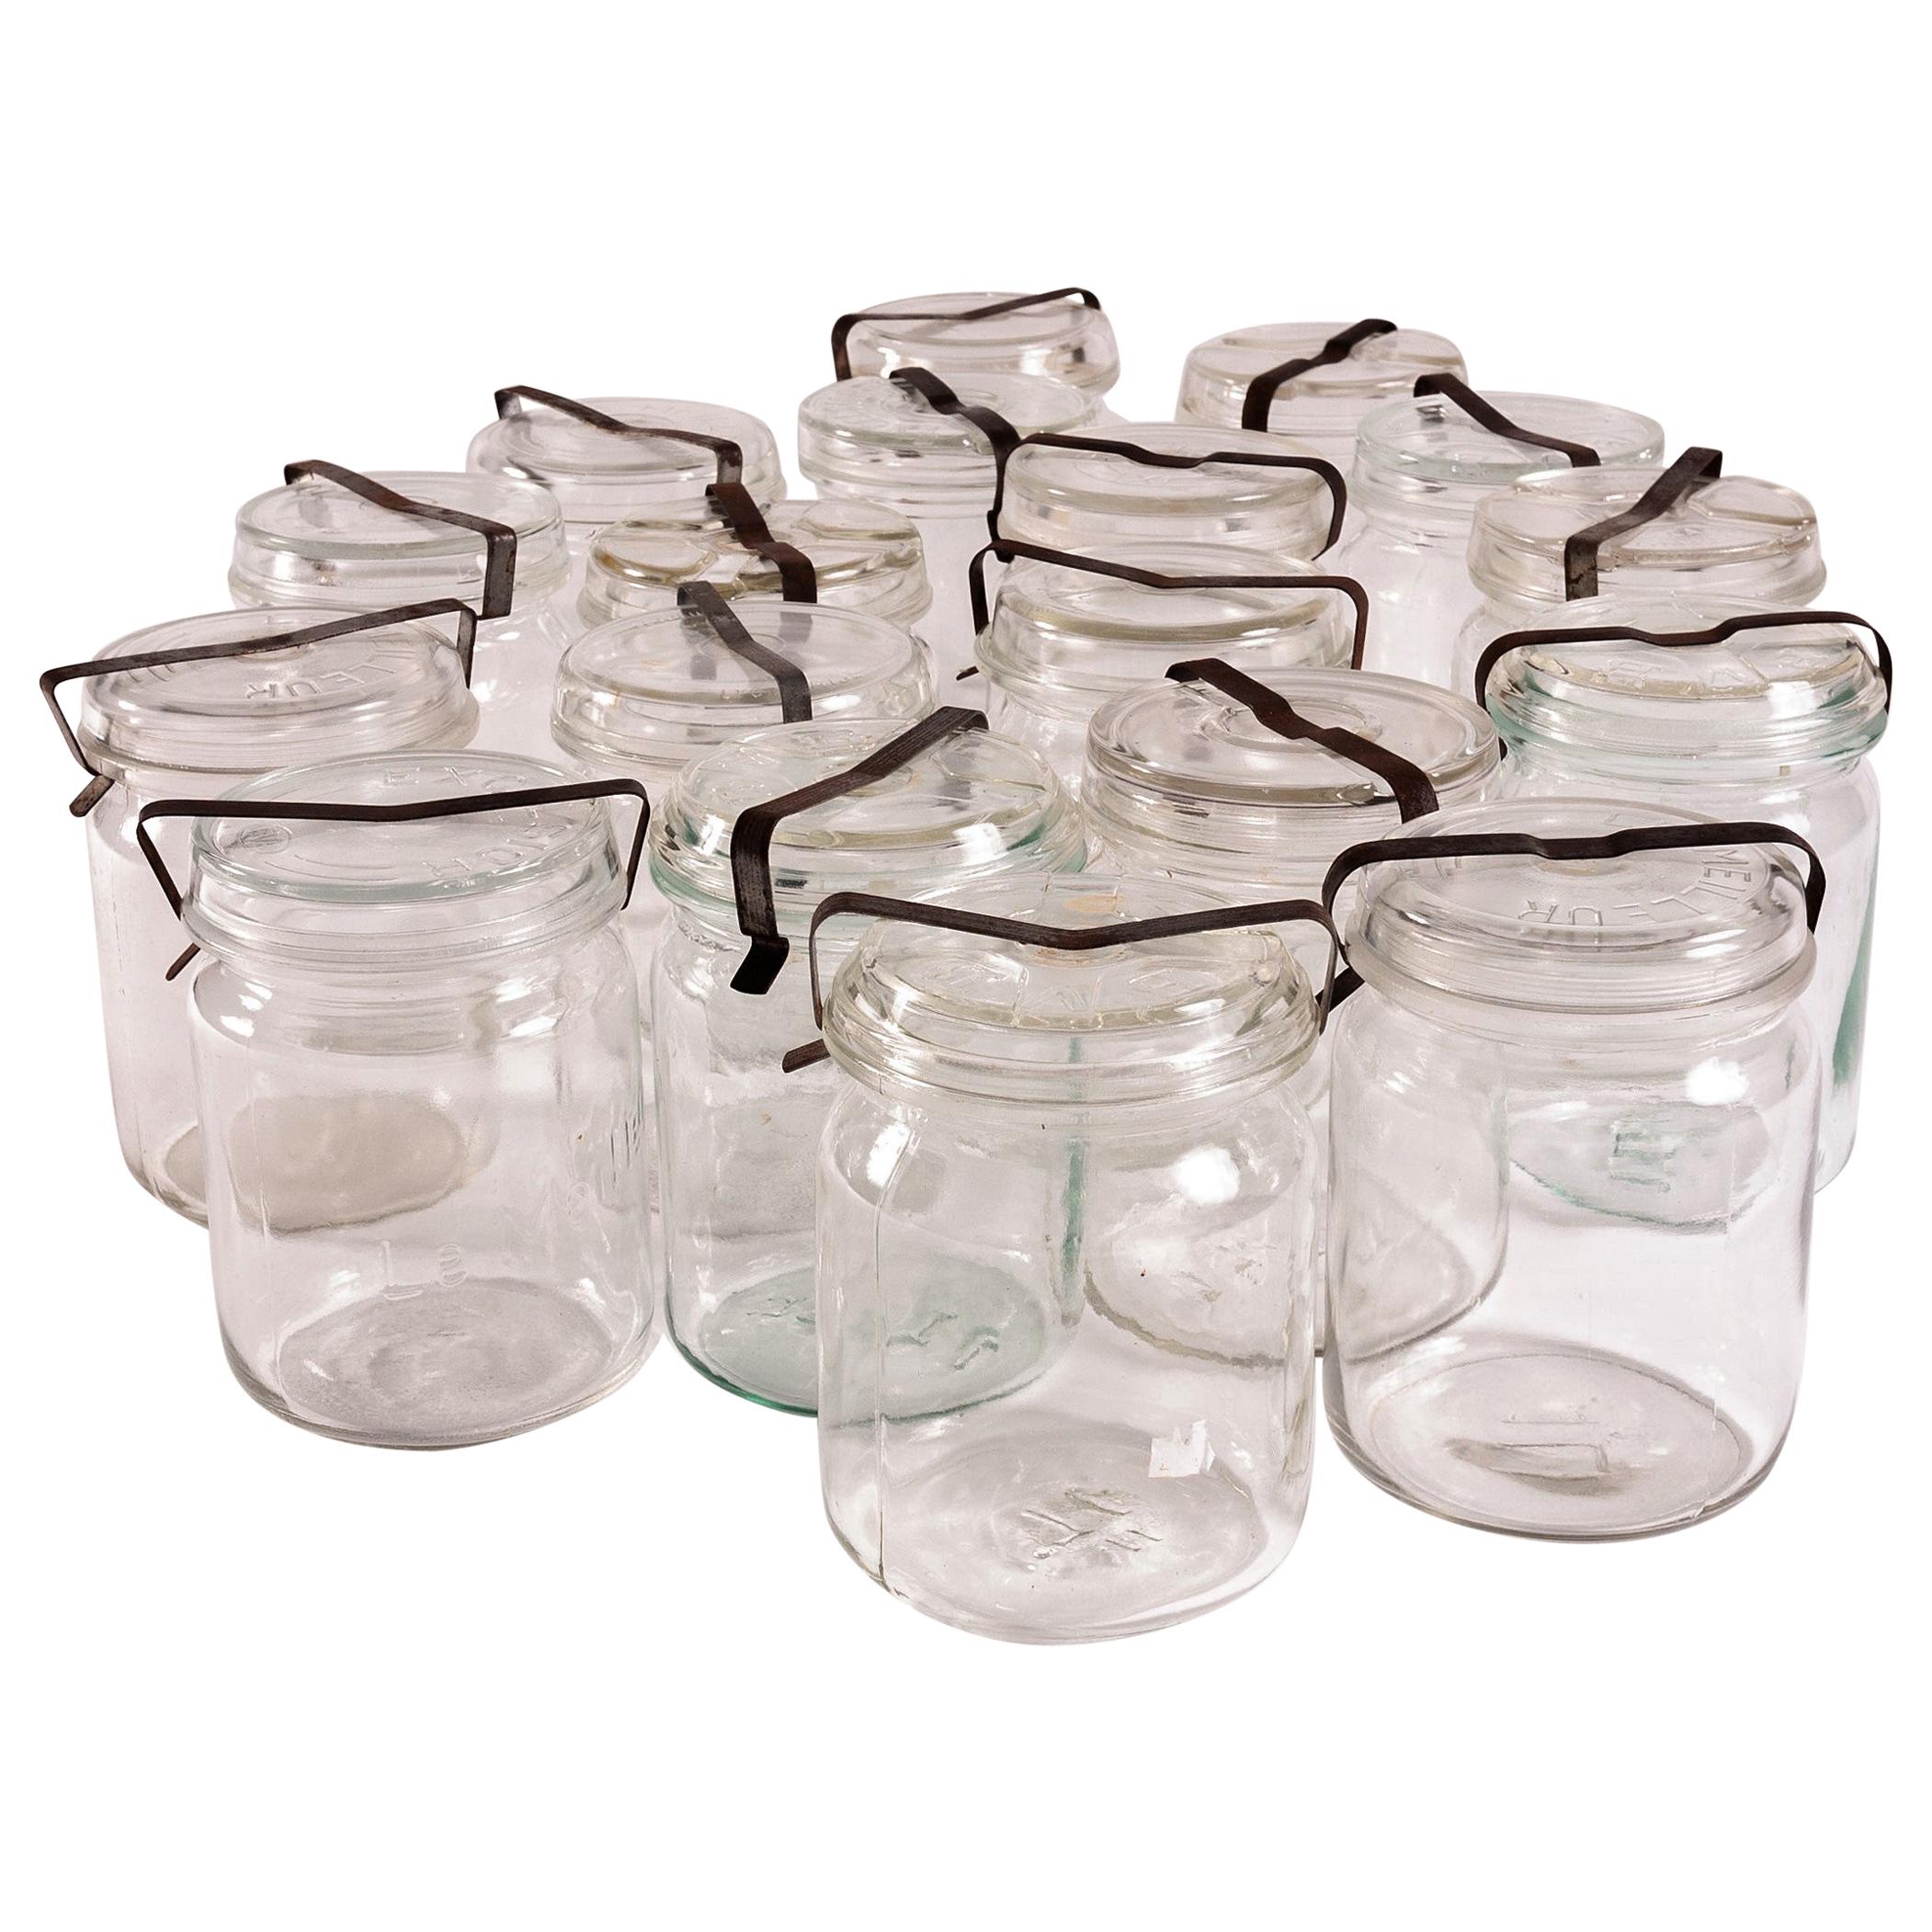 1970s Decorative French Preserving Jars